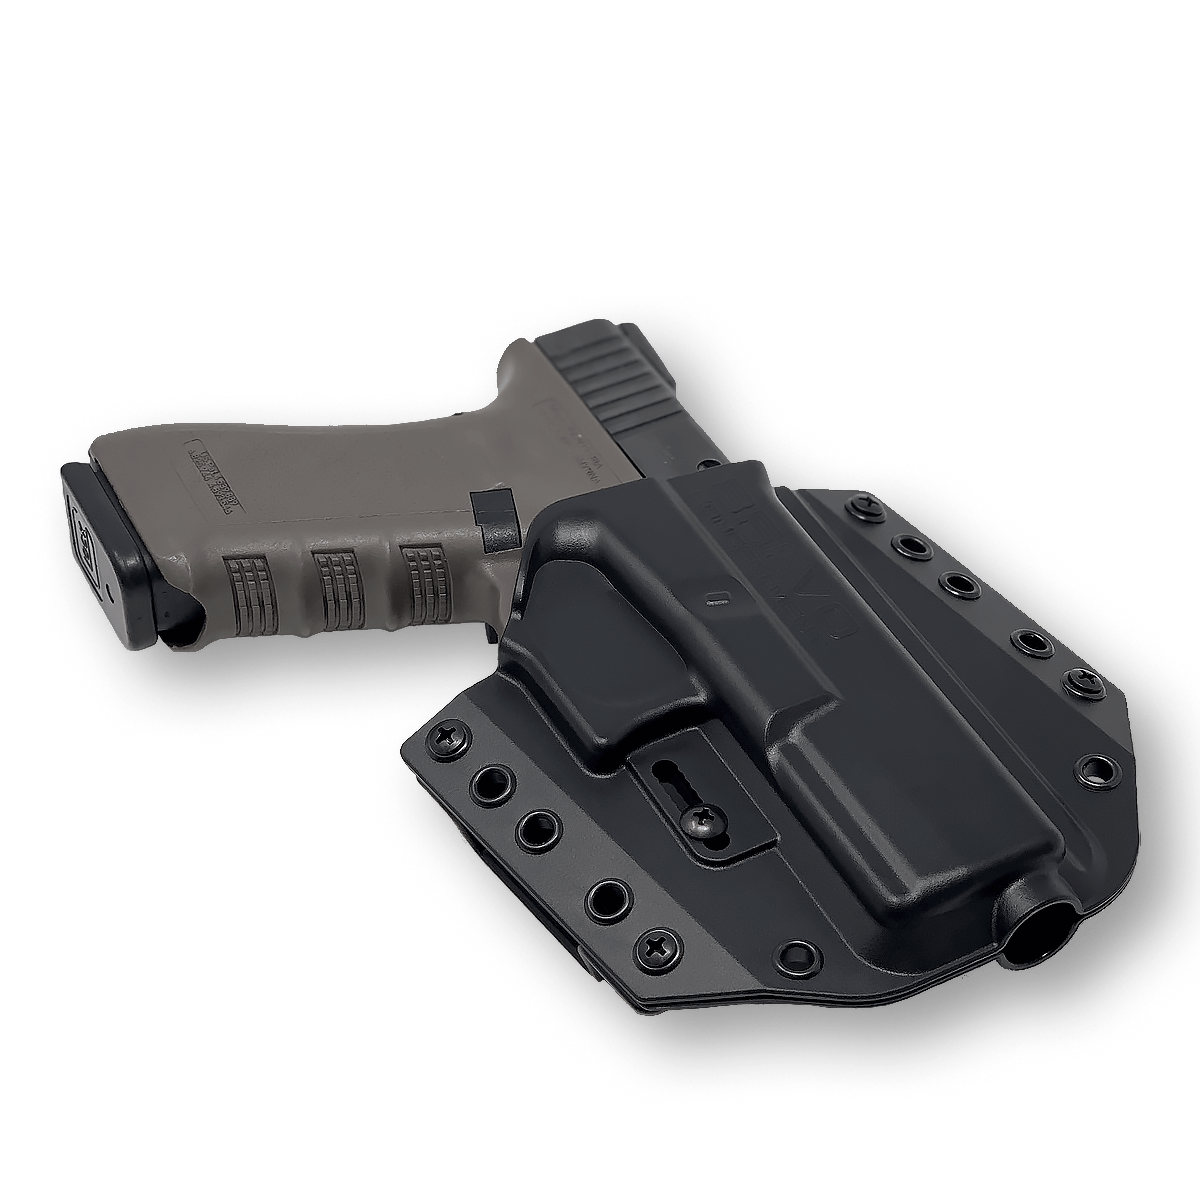 G22 Gen 5 Holster, OWB Holster for Glock 22 Gen5 - Adjustable Tension &  Cant, Index Finger Released, Autolock, Outside Waistband Carry, Silicone Pad Paddle